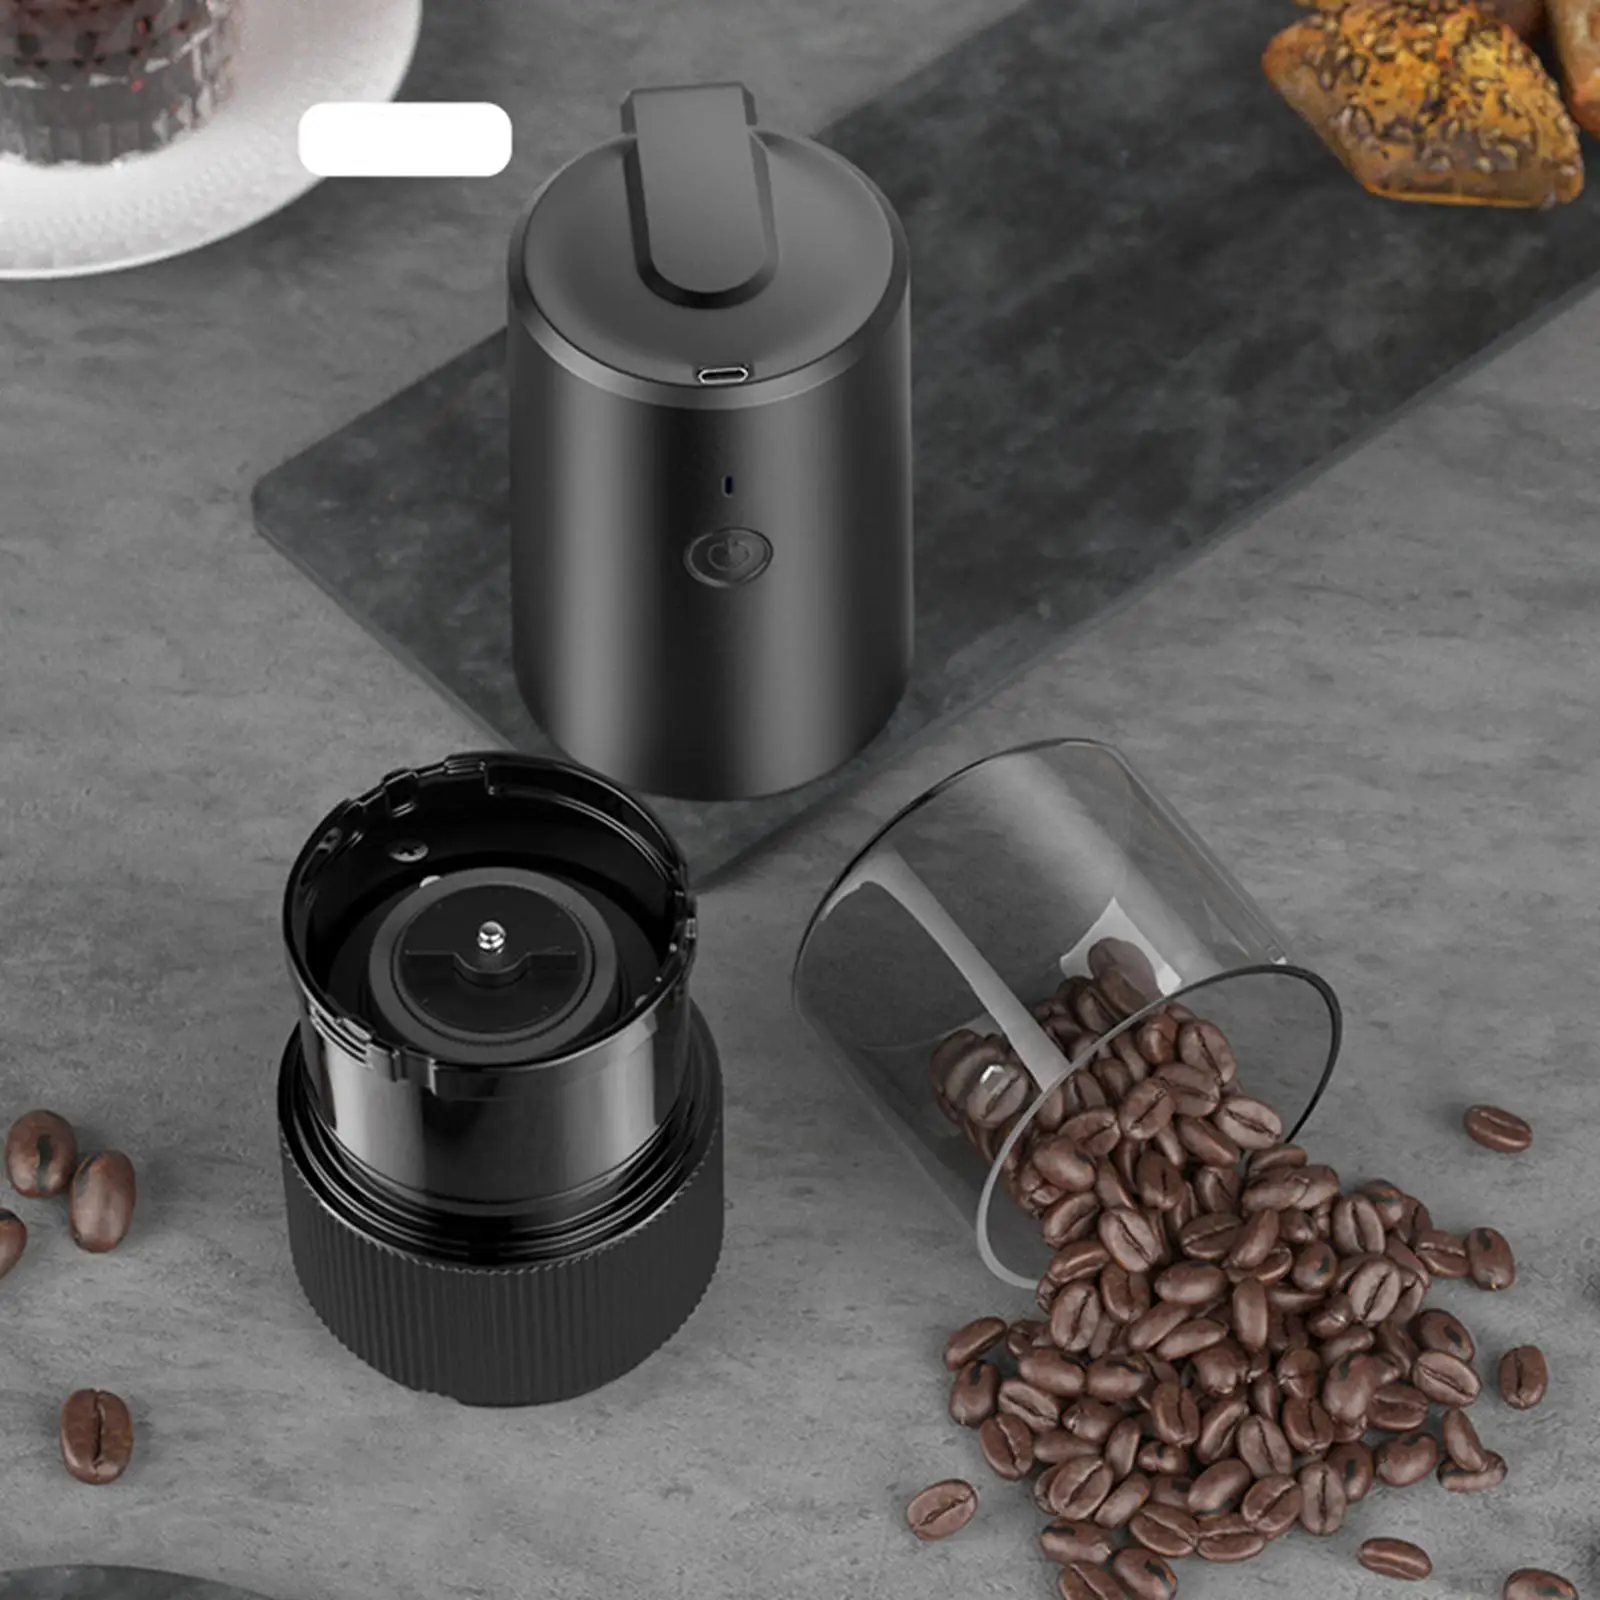 Home Electric Coffee Grinder Adjustable Burr Mill Automatic Coffee Bean Grinder for Nuts Beans Spices Grains Grinding Household